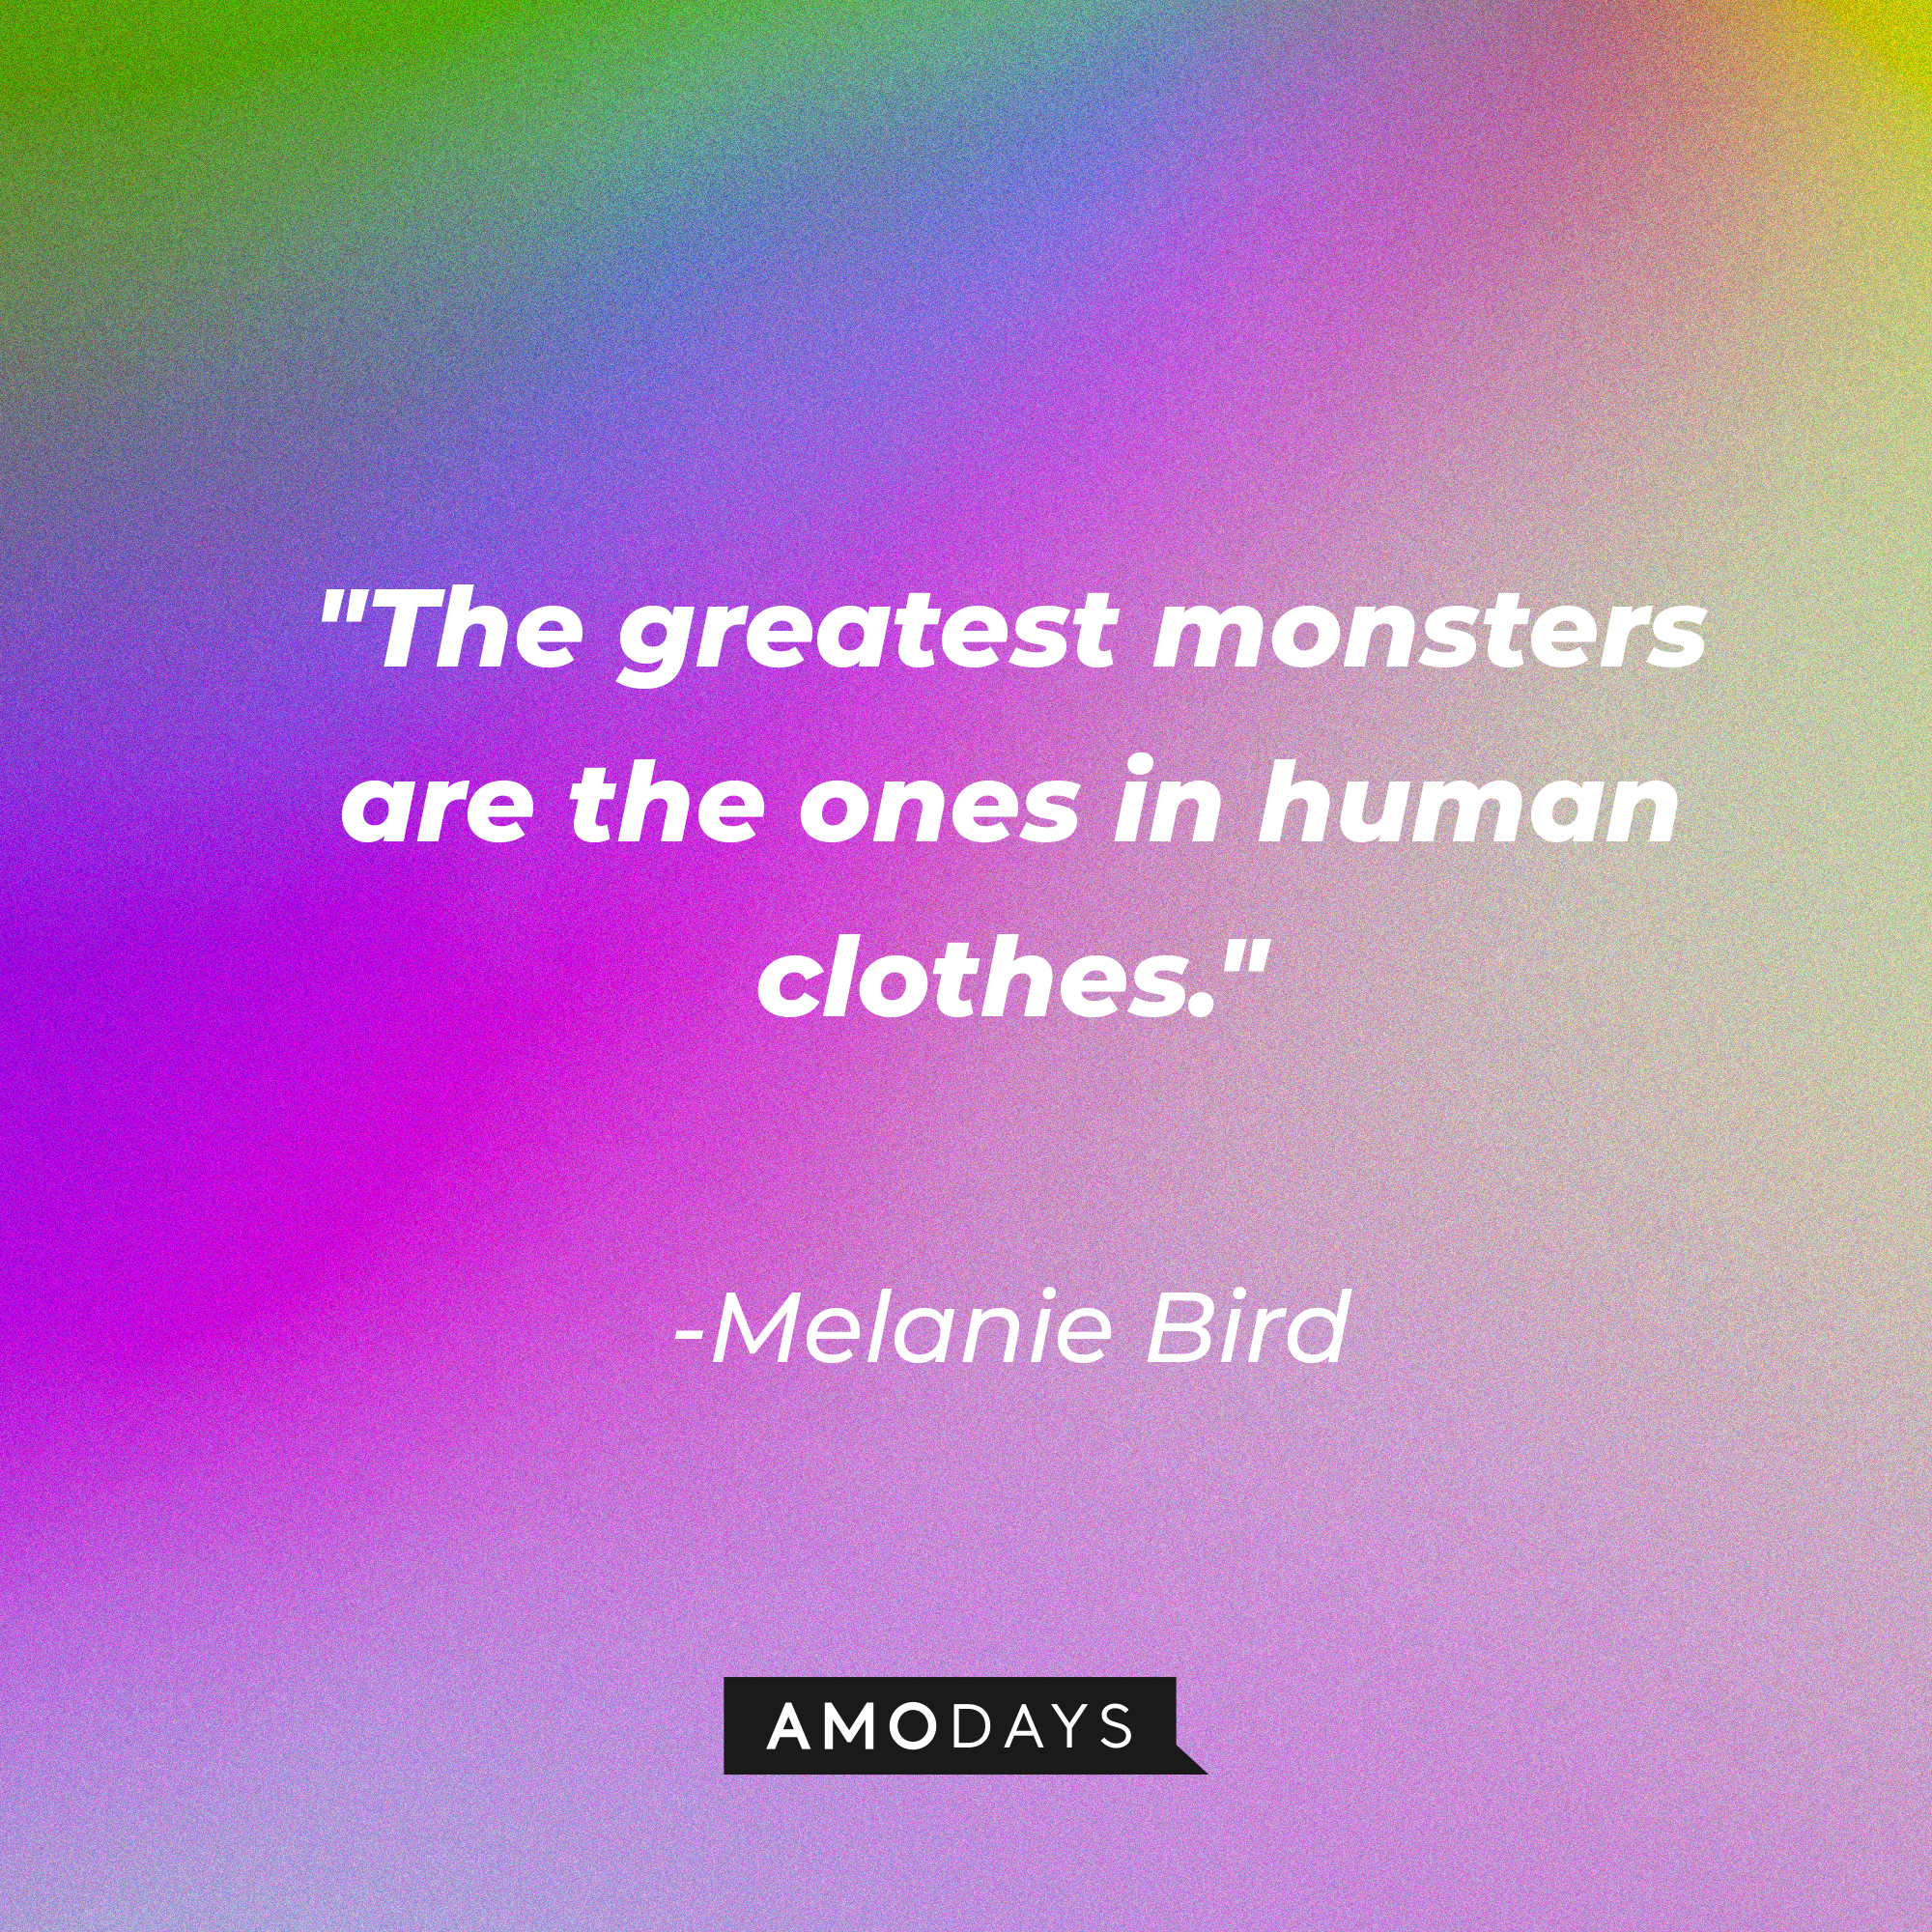 Melanie Bird's quote: "The greatest monsters are the ones in human clothes." | Image: AmoDays